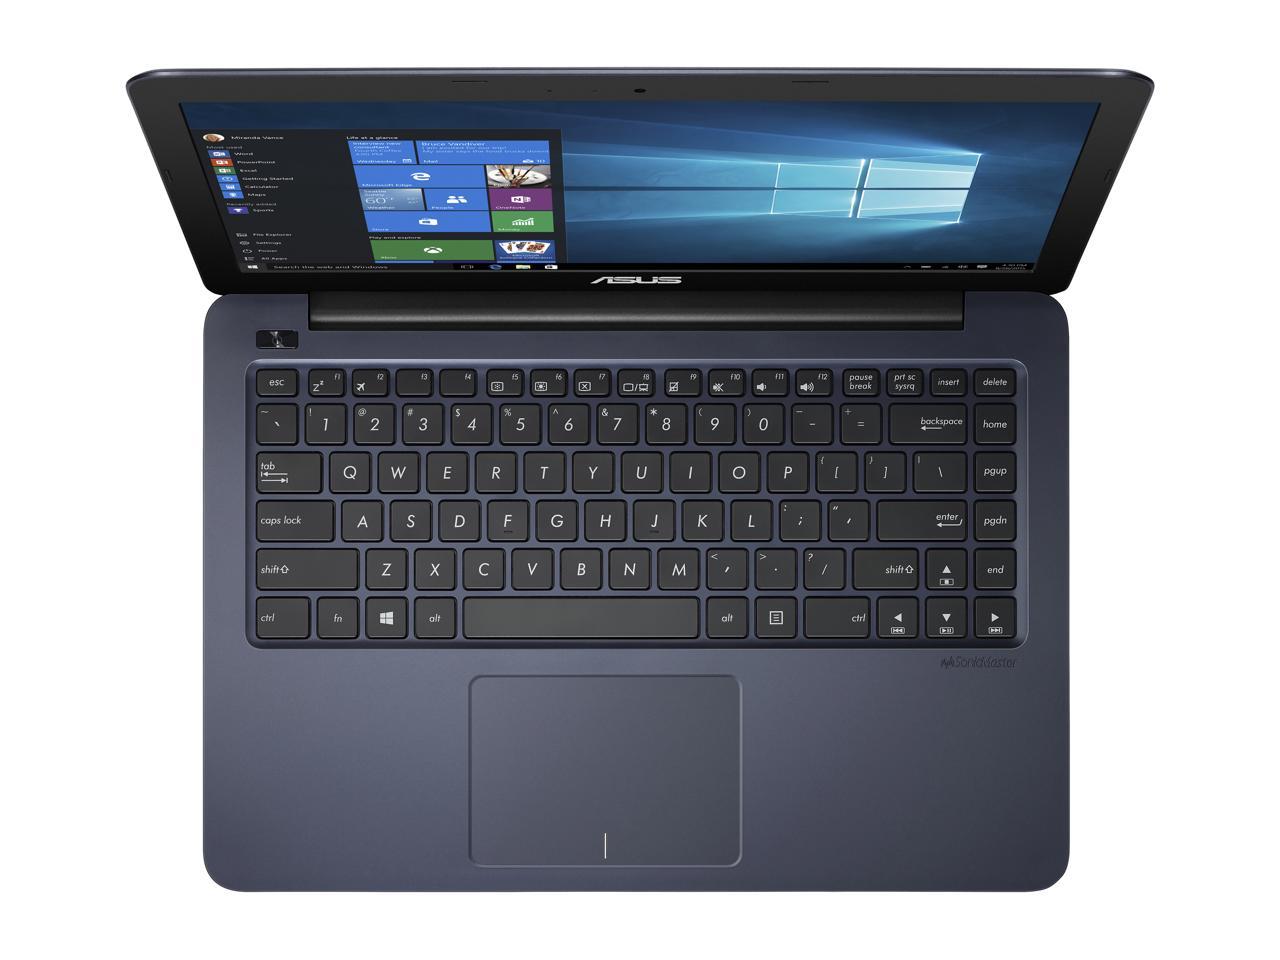 ASUS L402 Thin and Light Laptop, 14" HD, AMD E2-6110 Processor, AMD Radeon R2 Graphics, 4 GB DDR3 RAM, 32 GB eMMC Flash Storage, Windows 10 S with 1 Year Office 365 Subscription Included - L402WA-EH21